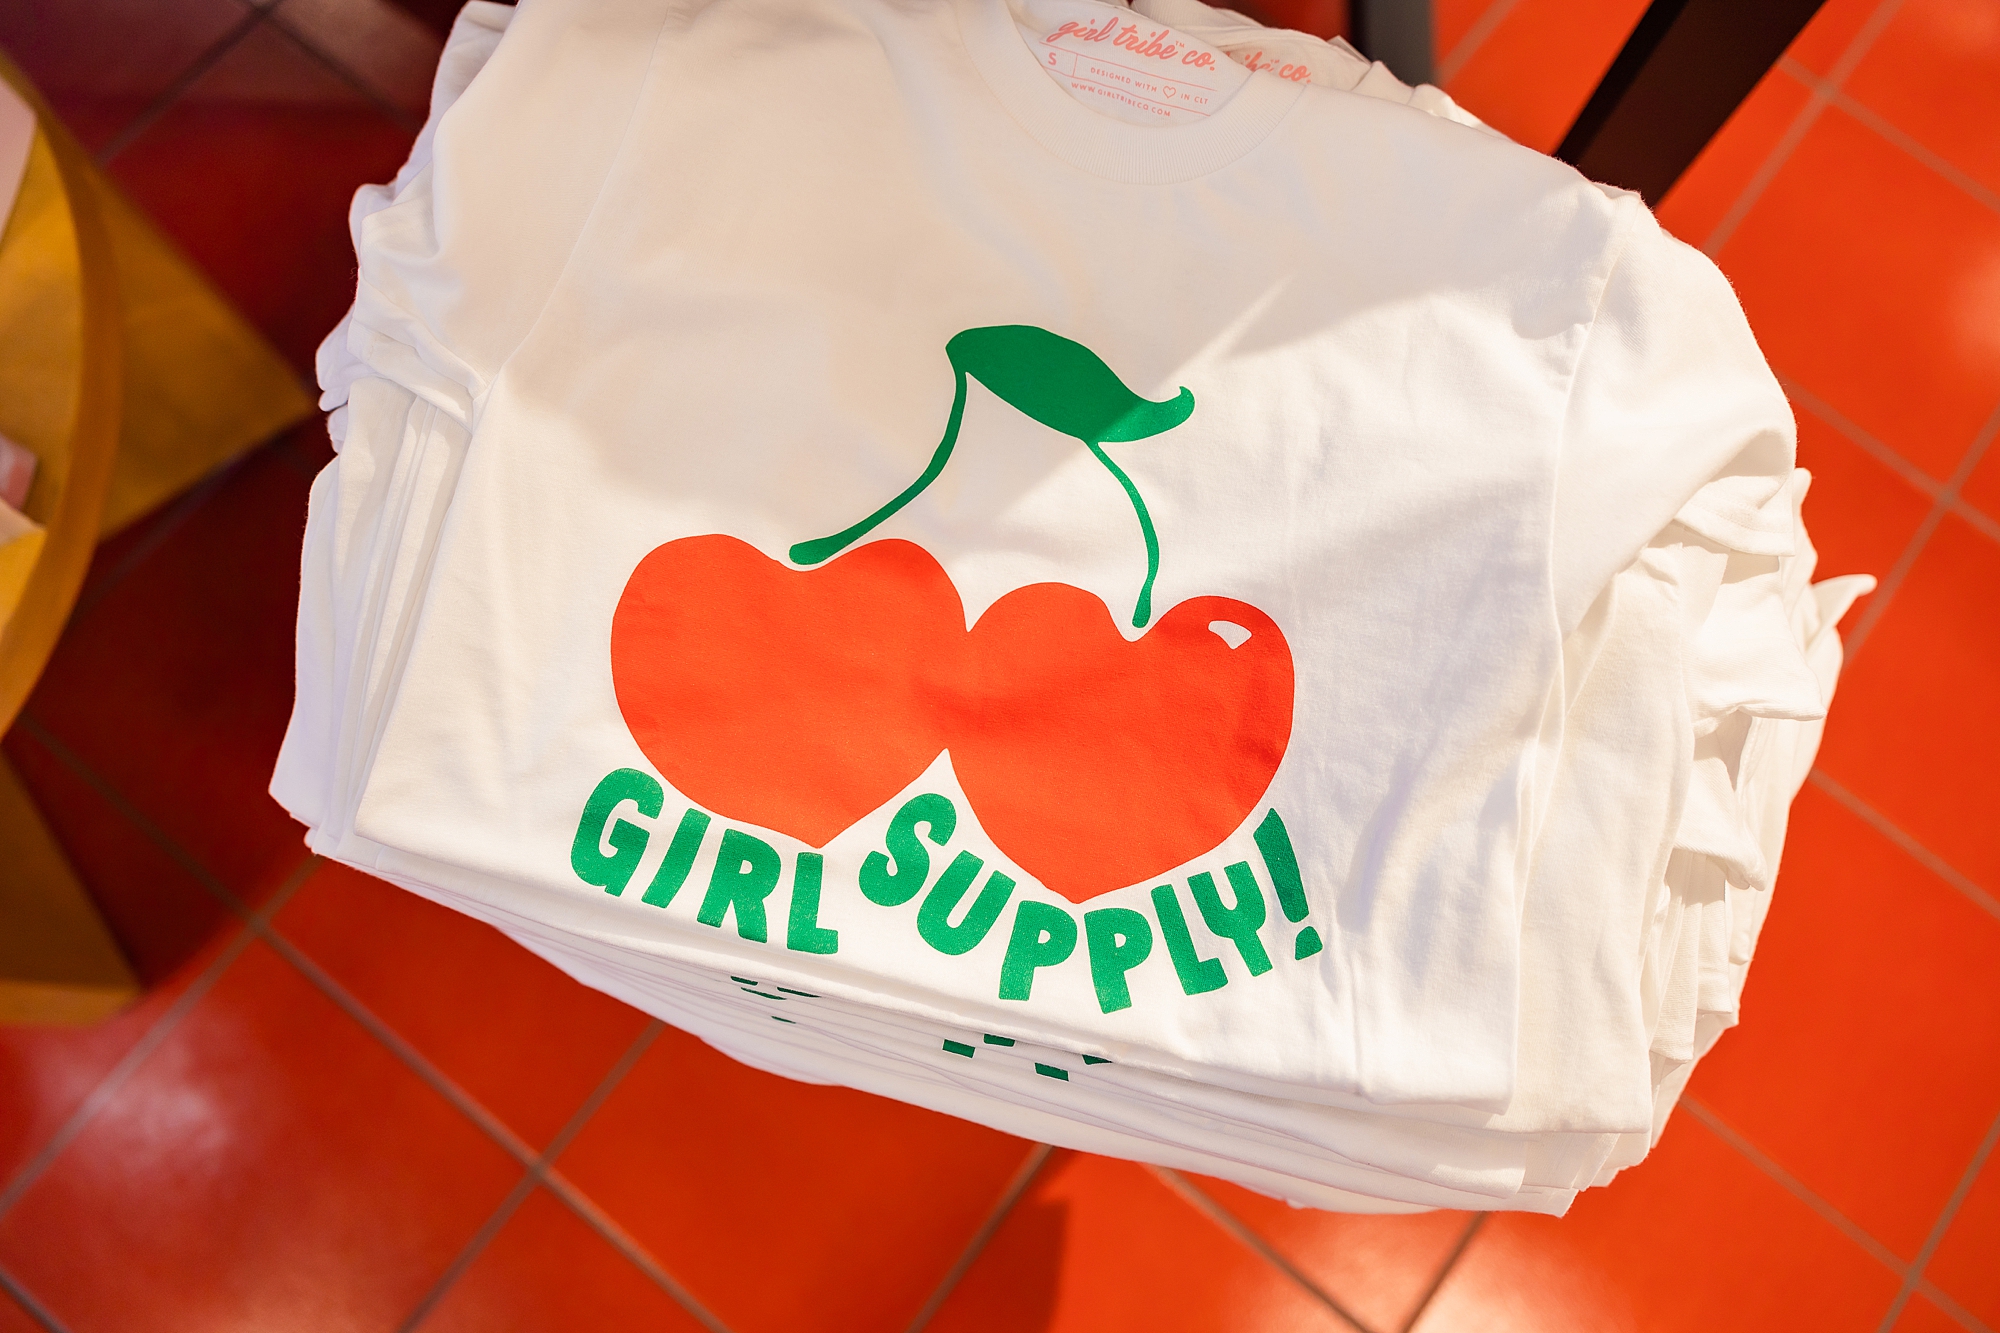 Girl Supply shirt with cherries for branding photos in Birkdale Village